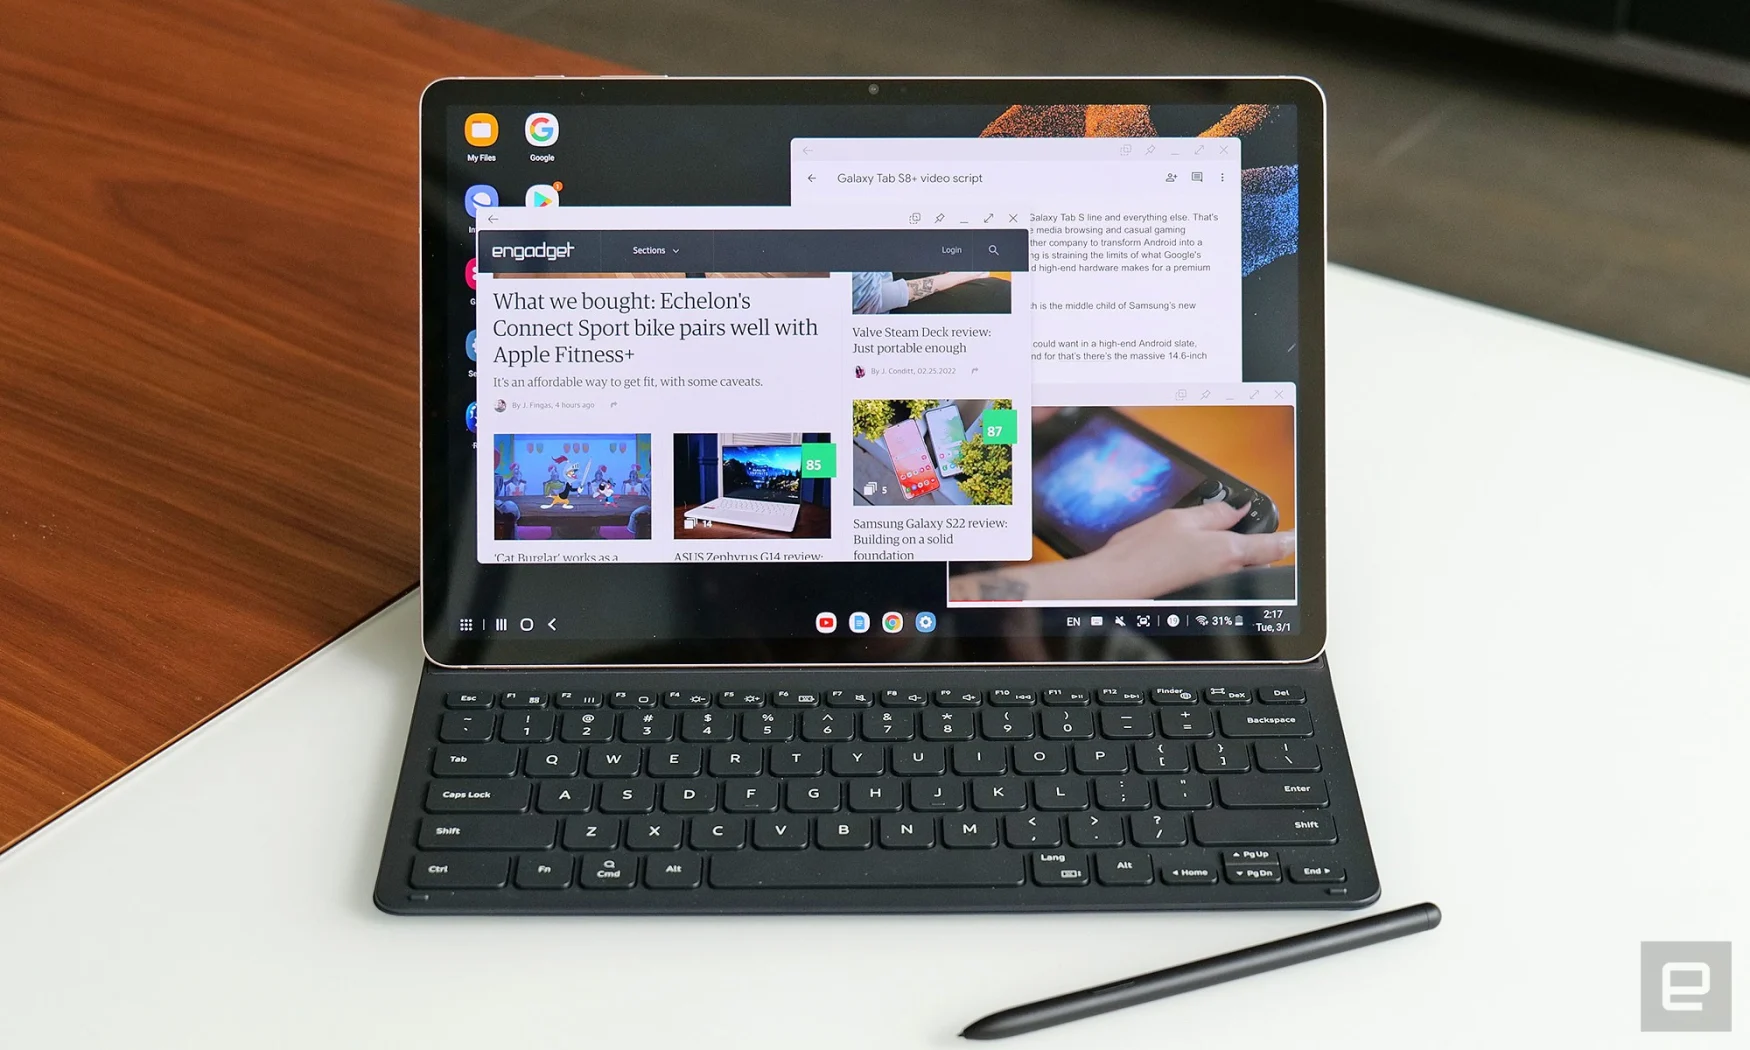 Unlike a lot of other Android tablets, the Galaxy Tab S8+ is better equipped to handle both content consumption and producitvity.